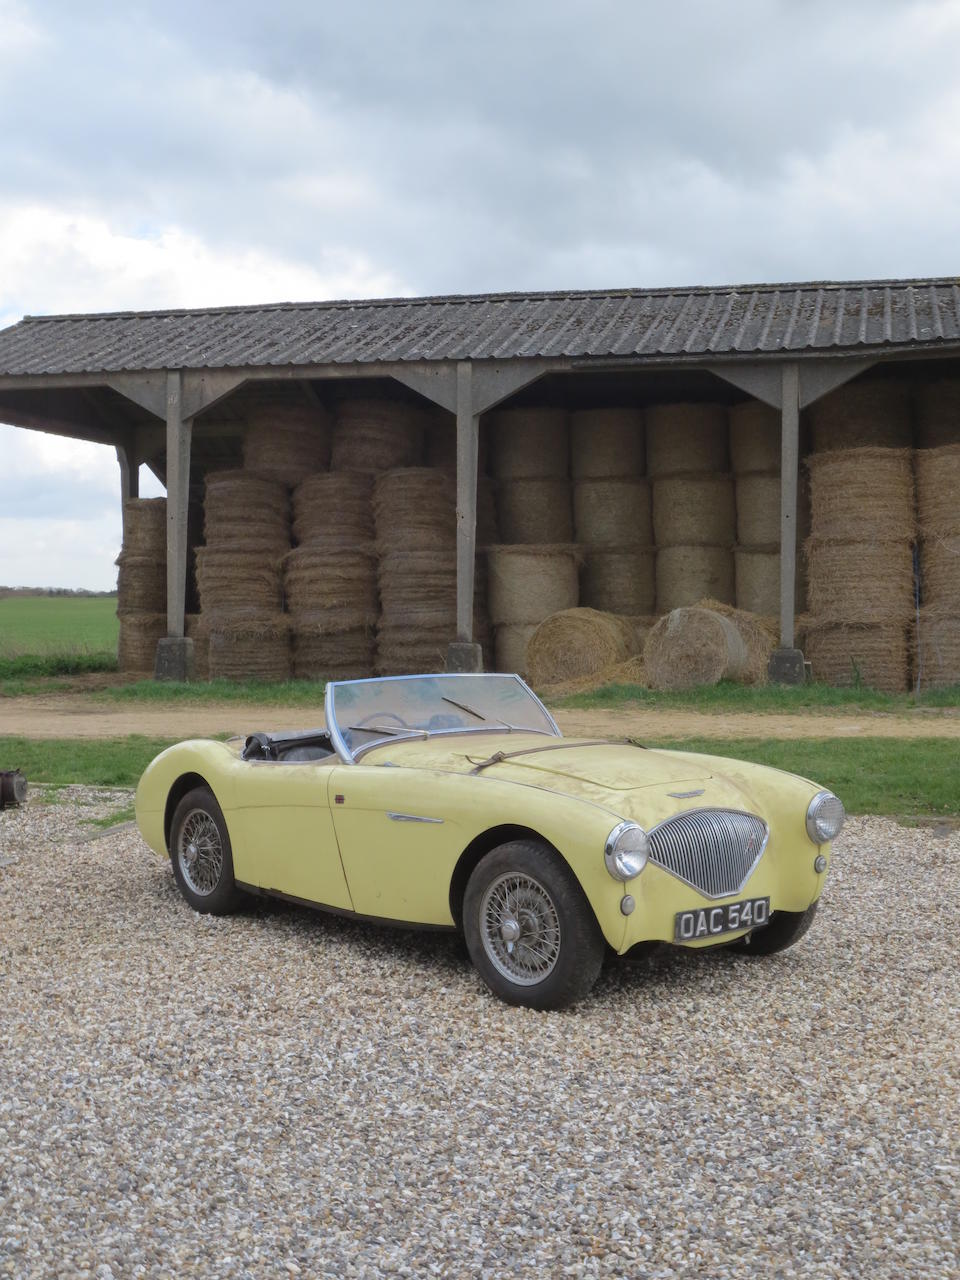 Property of a deceased's estate,1953 Austin Healey 100 BN1 Roadster  Chassis no. 146419 Engine no. B 139561